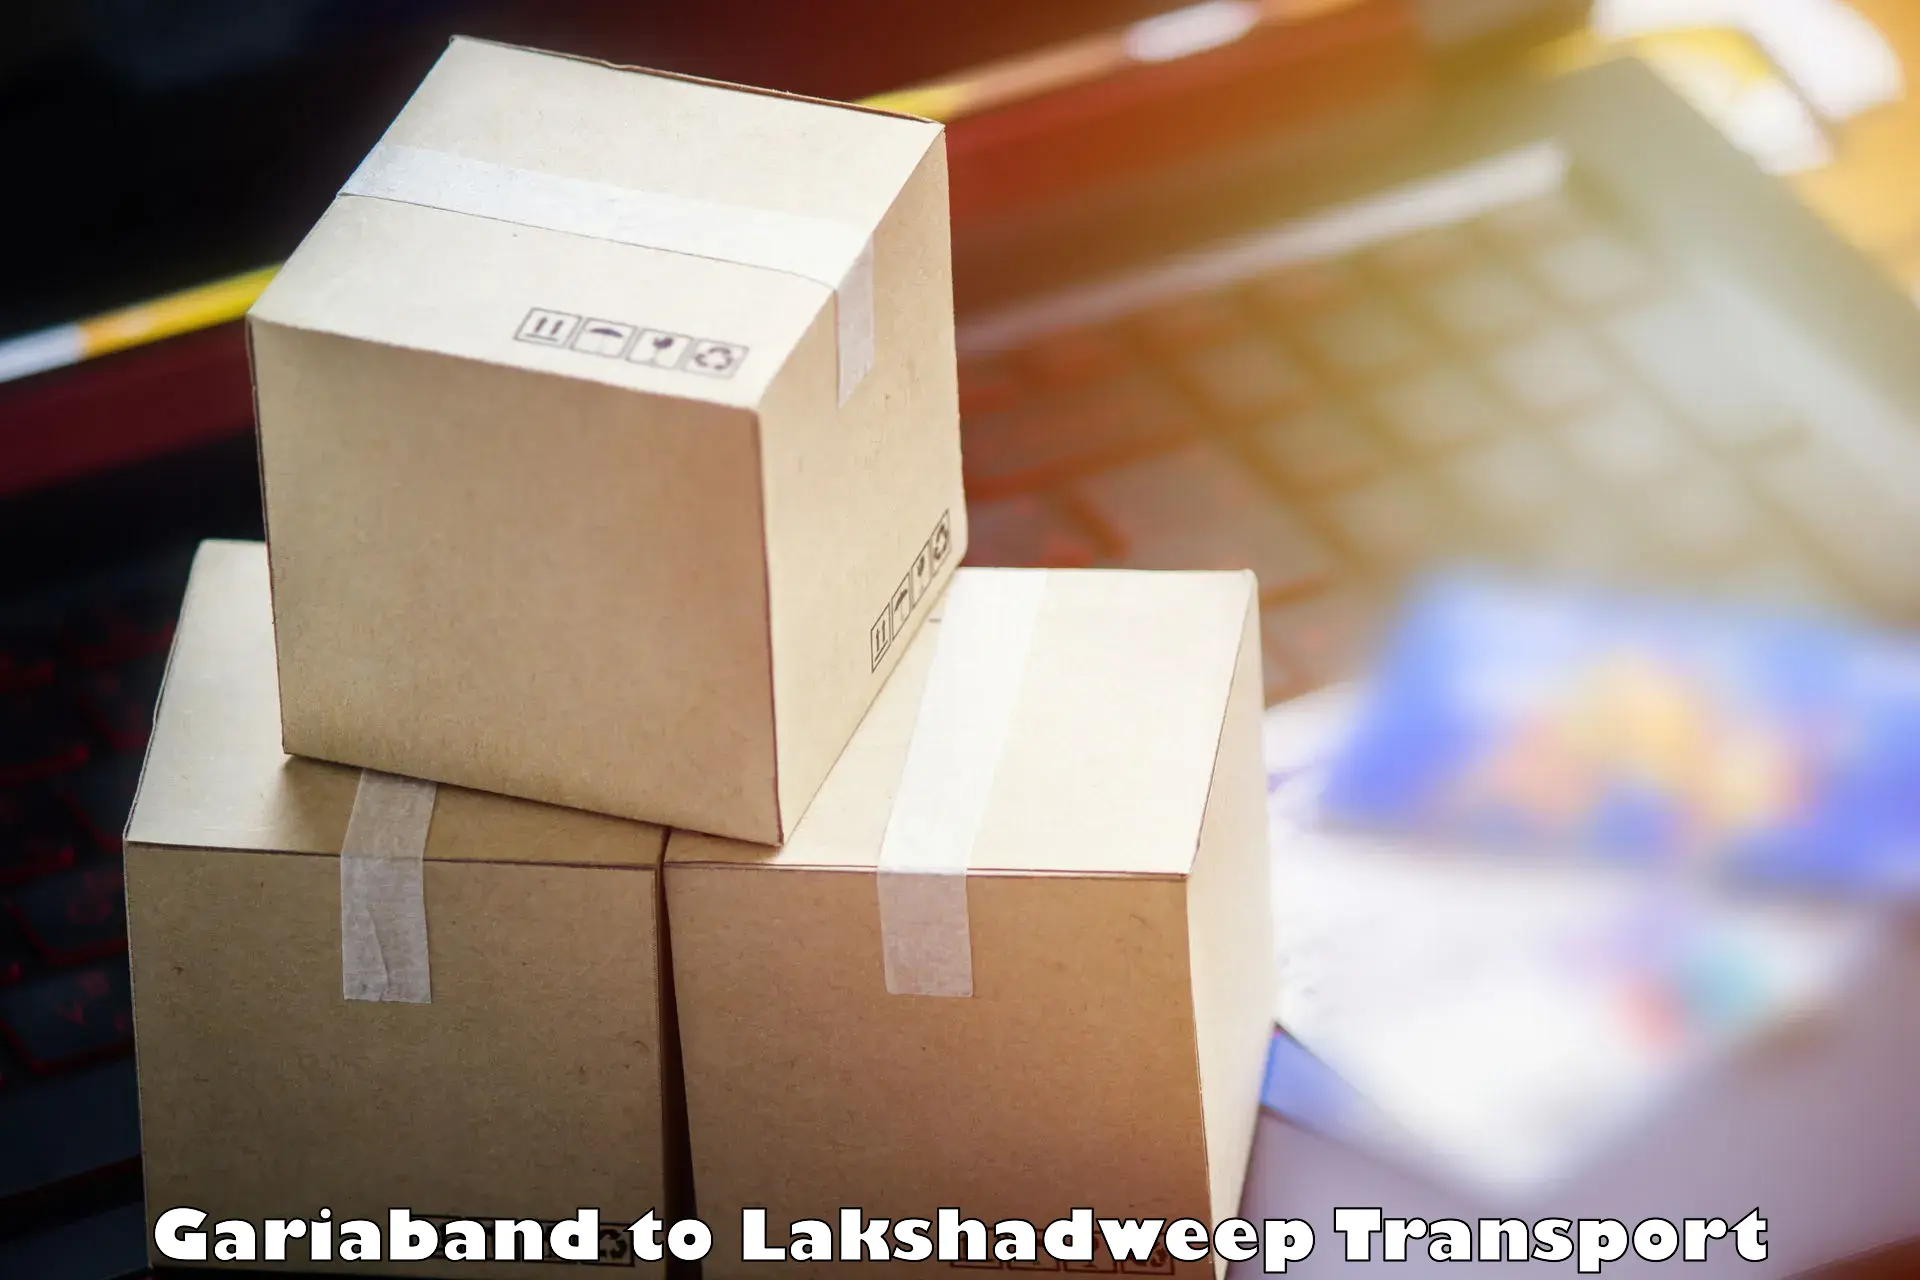 Road transport online services Gariaband to Lakshadweep